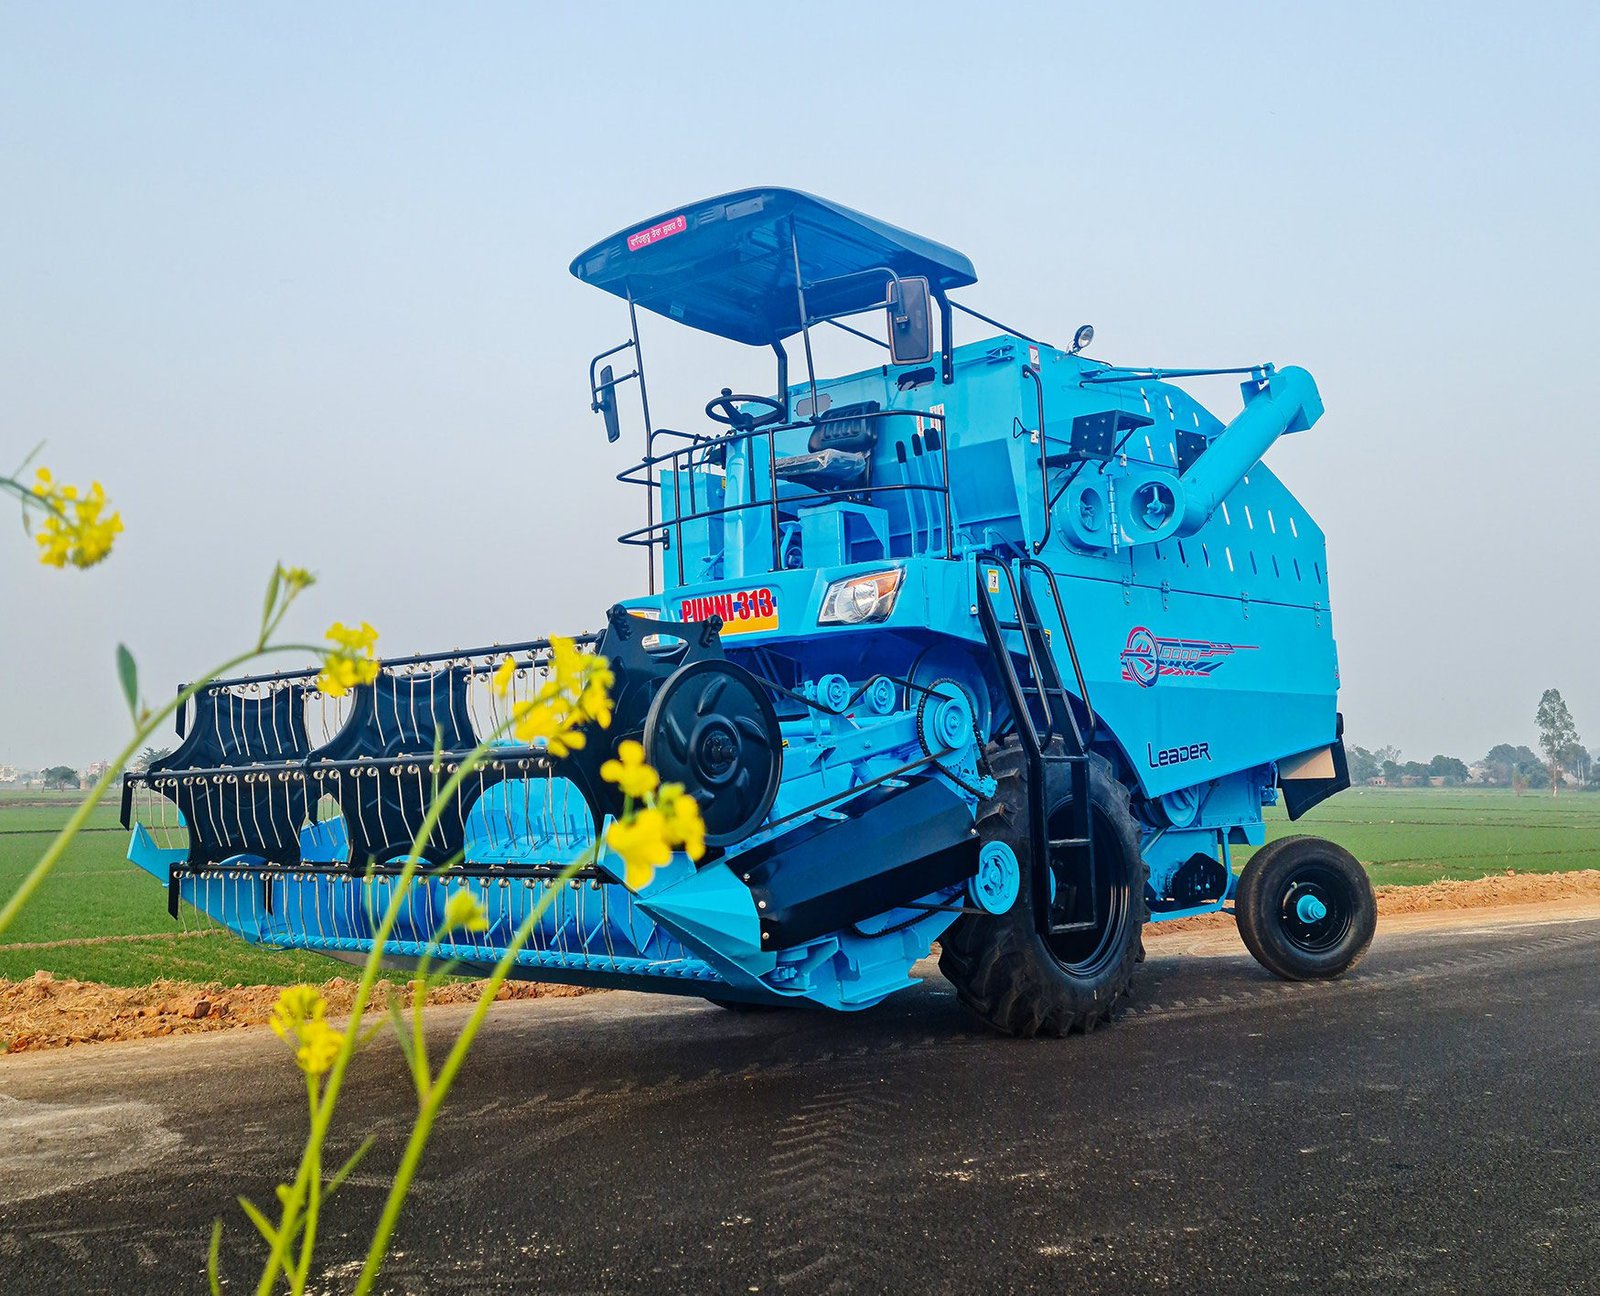 A second front view of the Mini combine in a field.